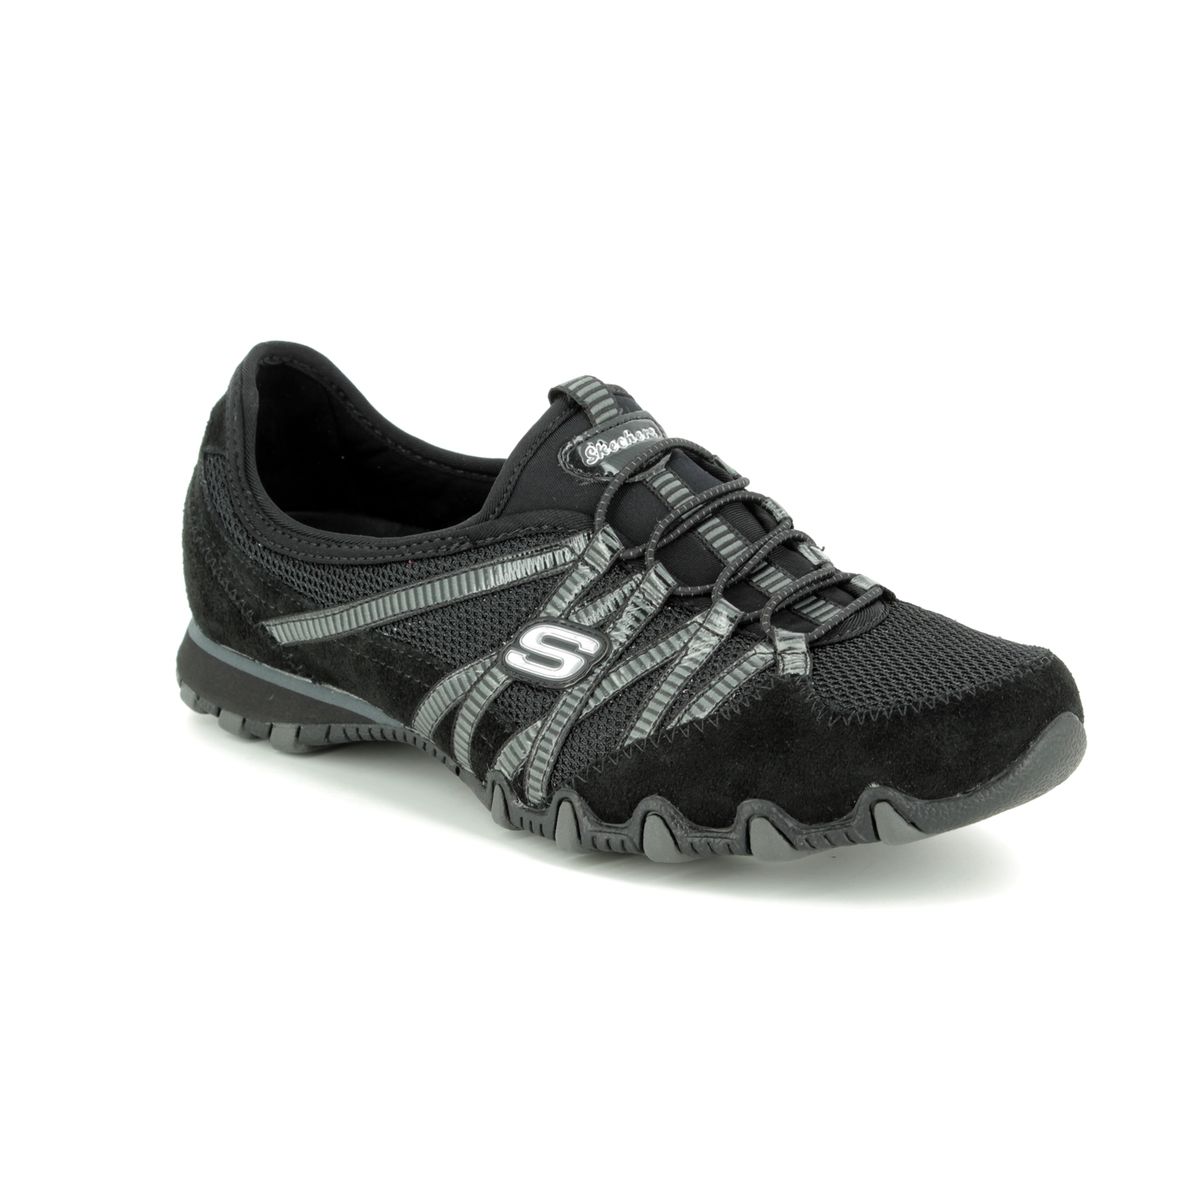 skechers bikers hot ticket bungee lace trainers